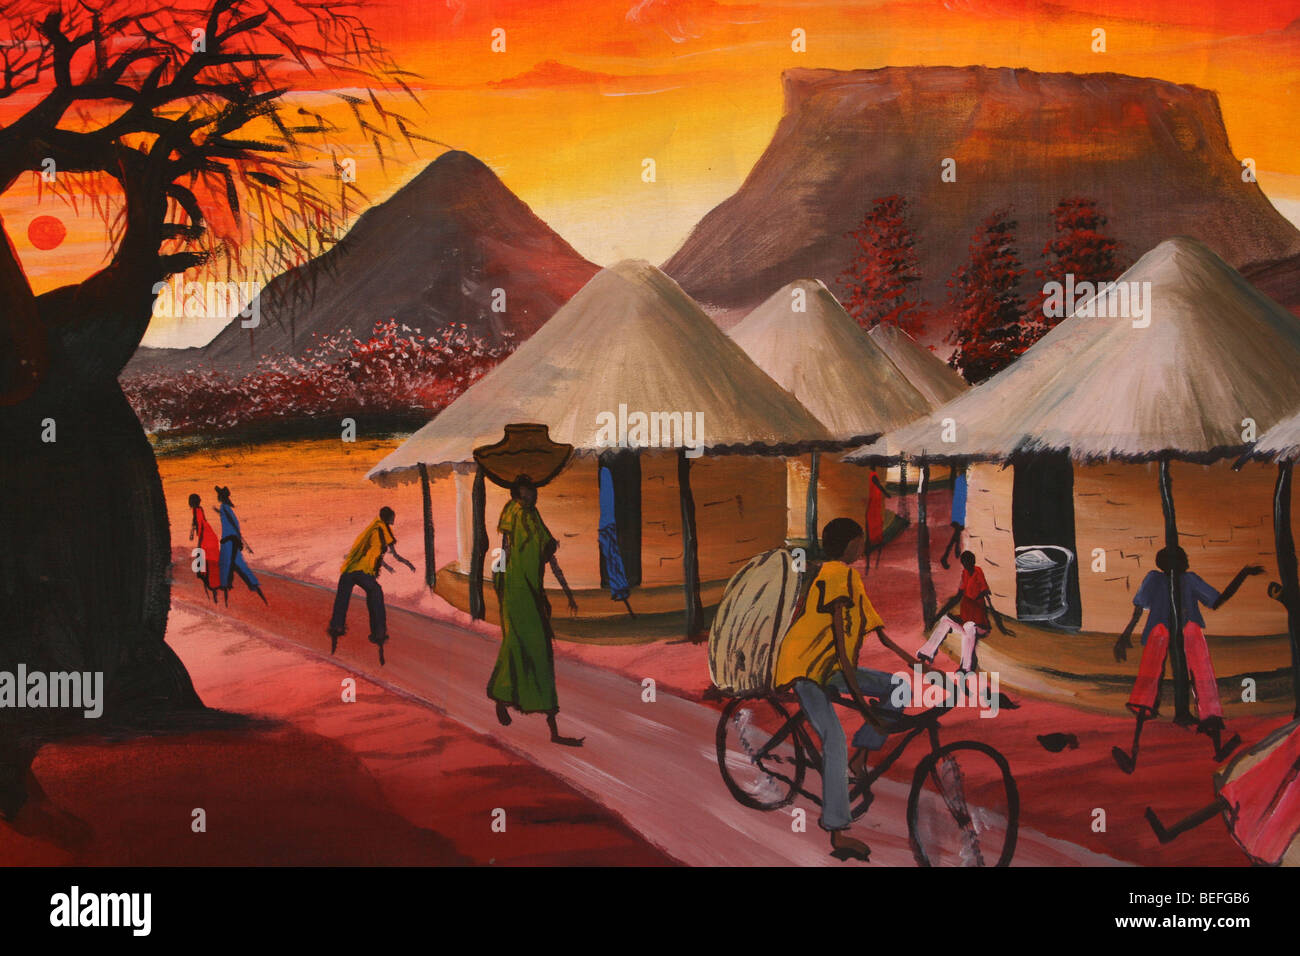 African Painting In Reds And Oranges Showing Typical Village Scene Stock Photo